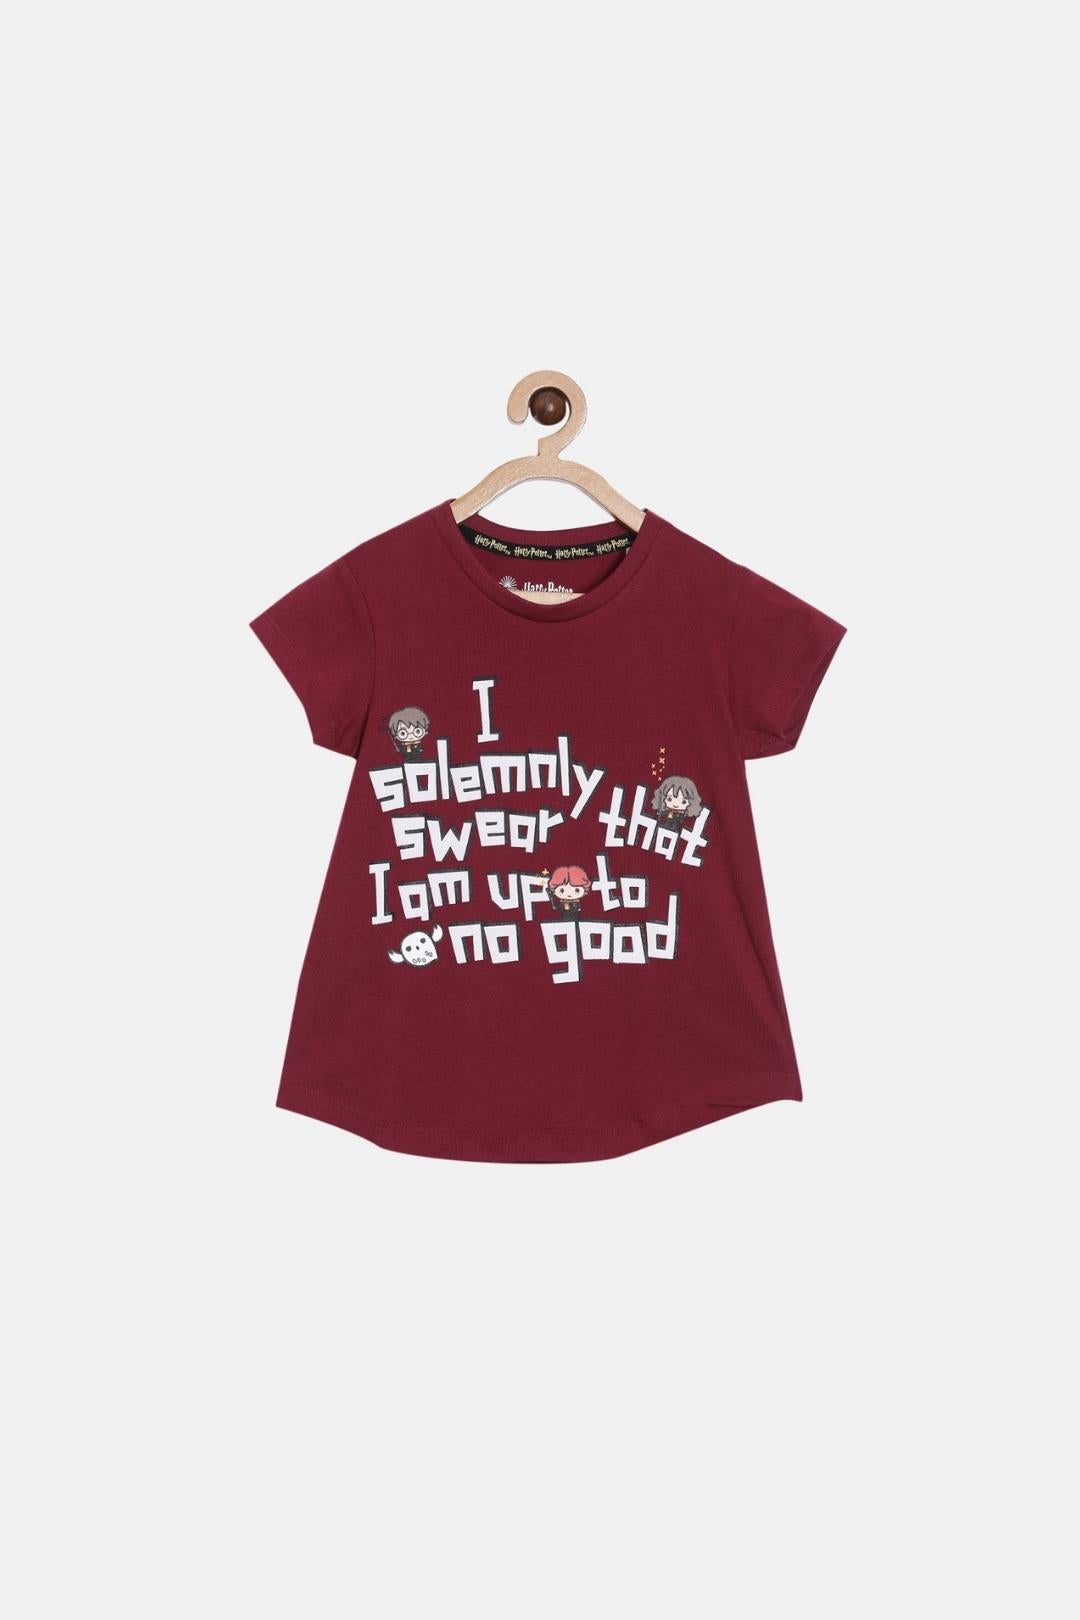 Harry Potter Solemnly Swear Tee for Girls